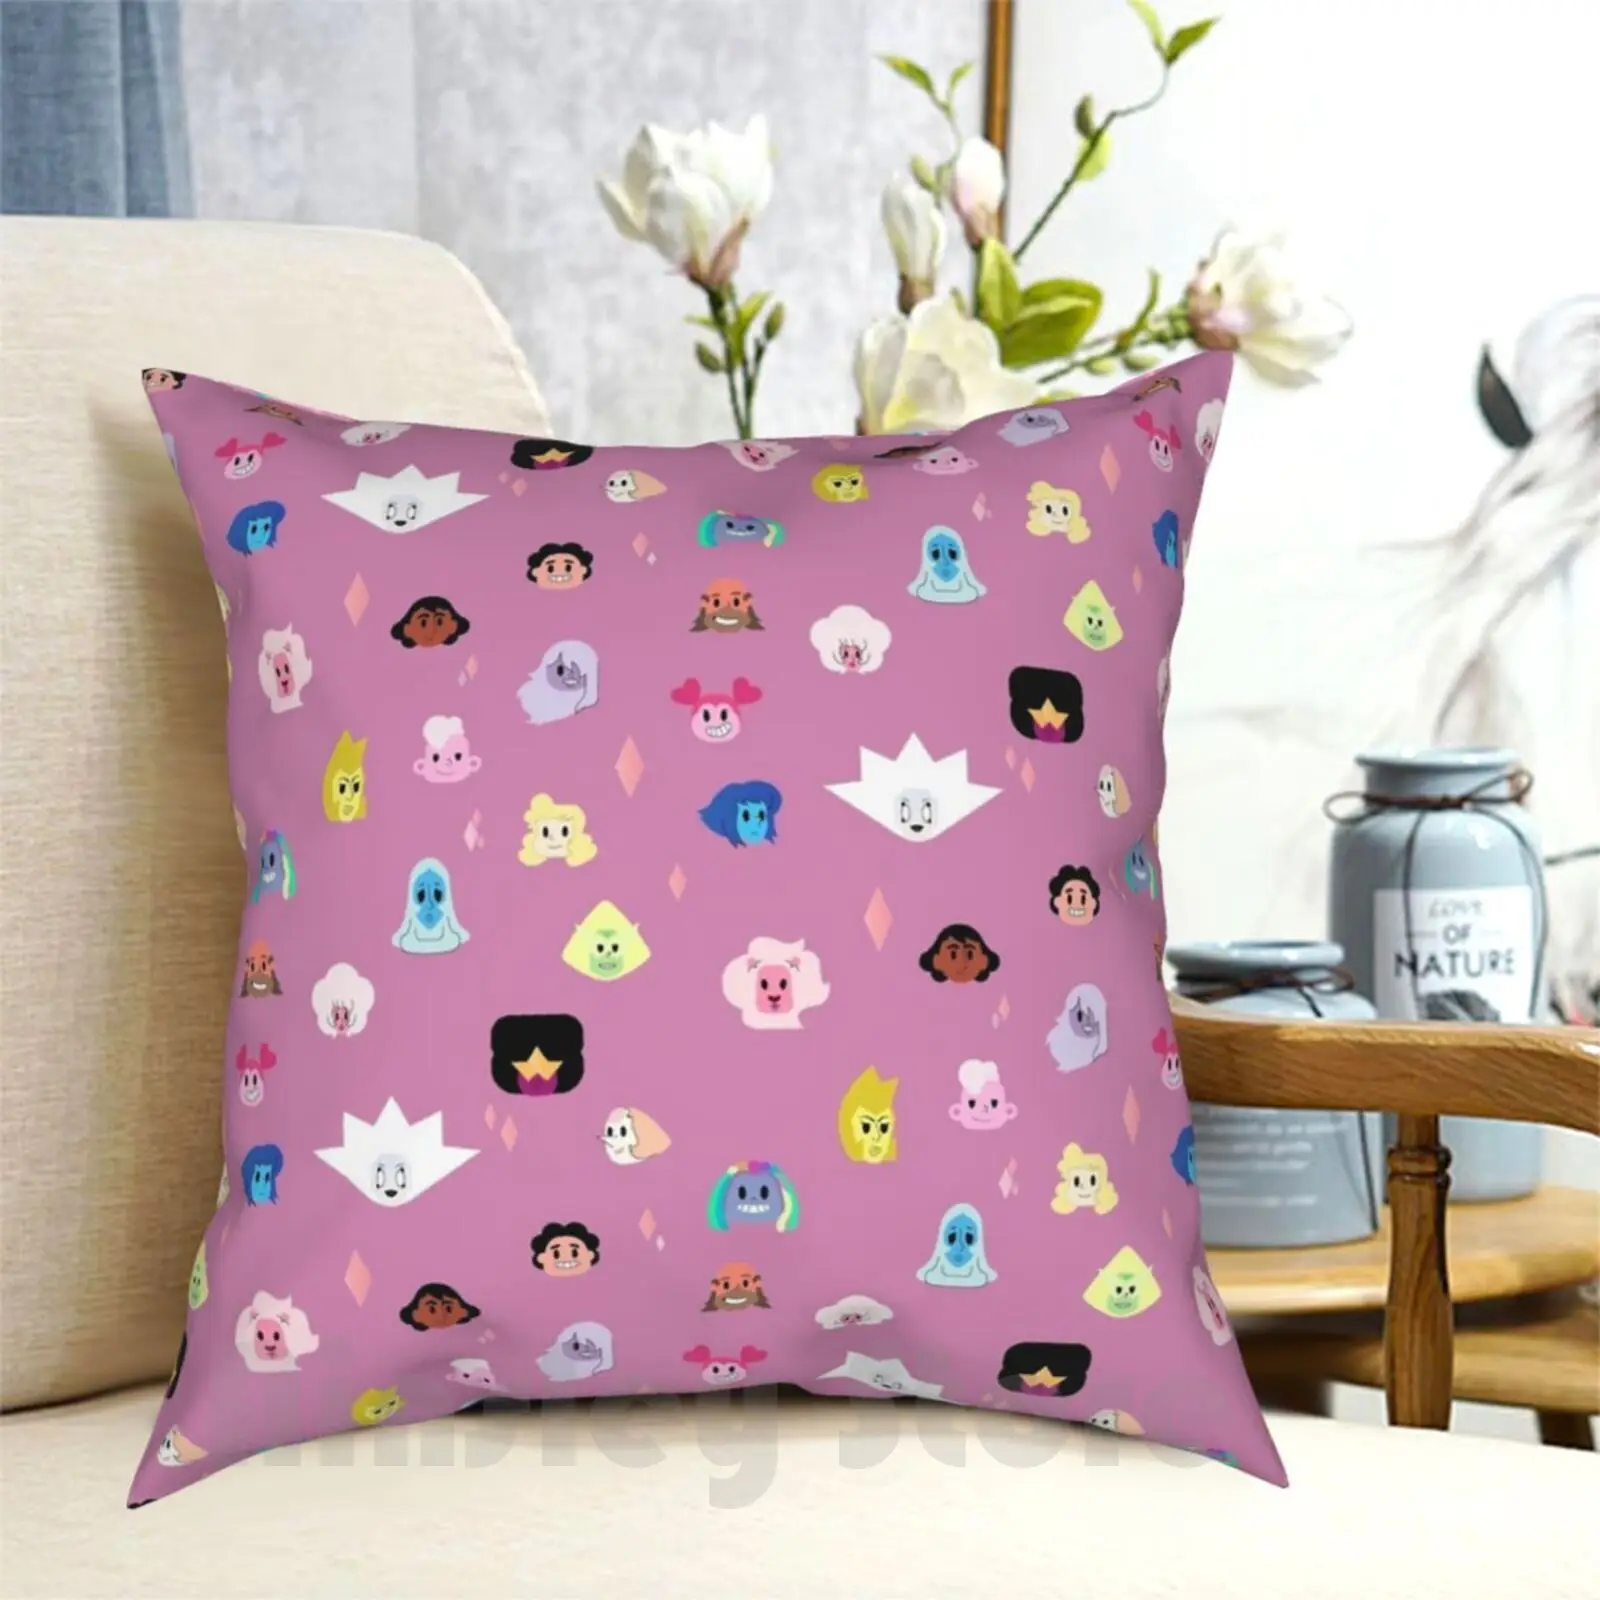 

Steven Universe The Movie Pattern Pillow Case Printed Home Soft Throw Pillow Steven Universe Garnet Amethyst Pearl